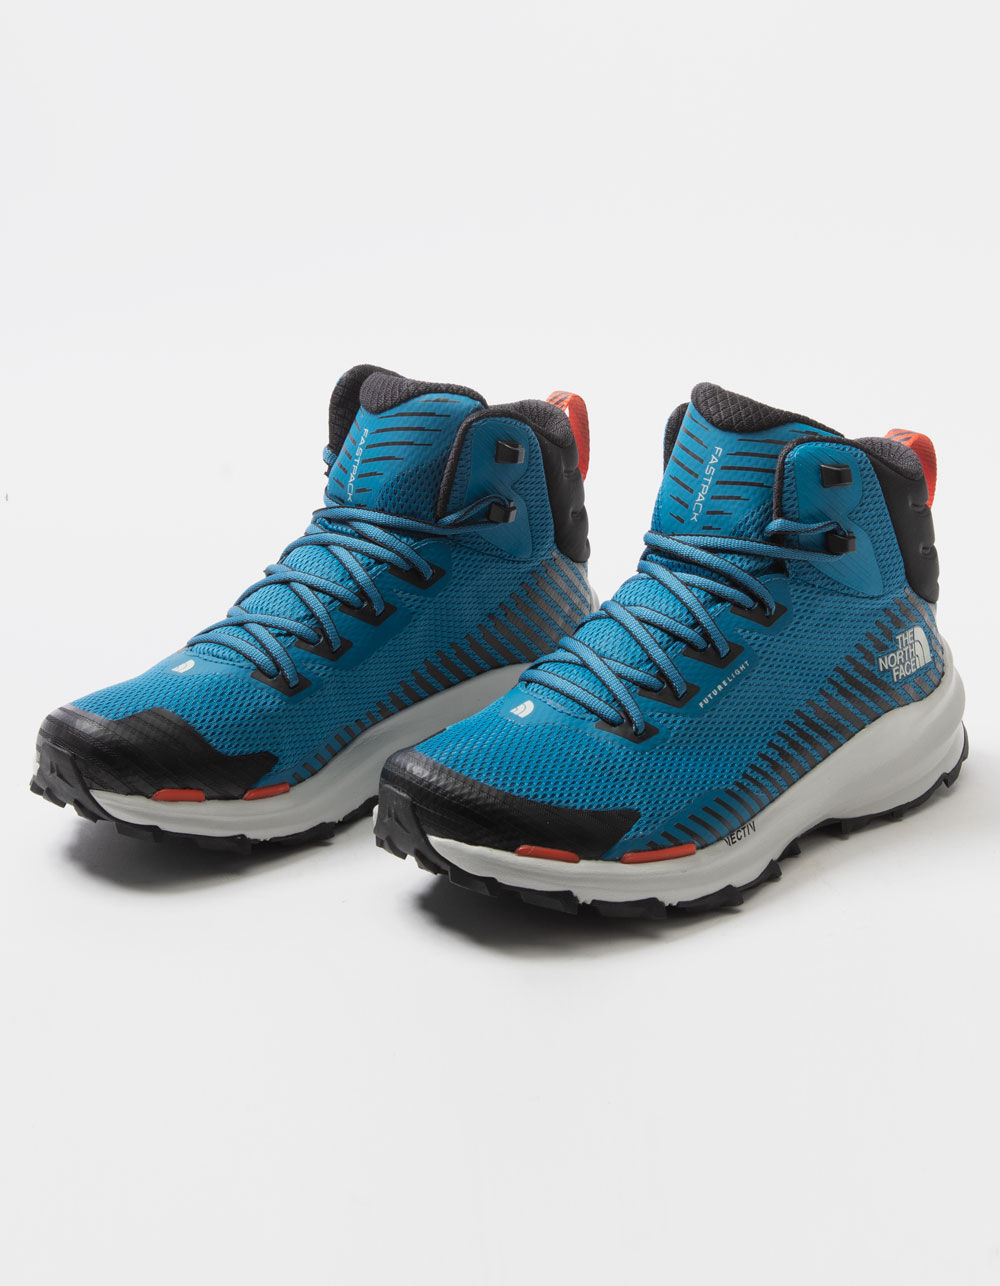 THE NORTH FACE Vectiv™ Fastpack Mid Futurelight™ Mens Boots